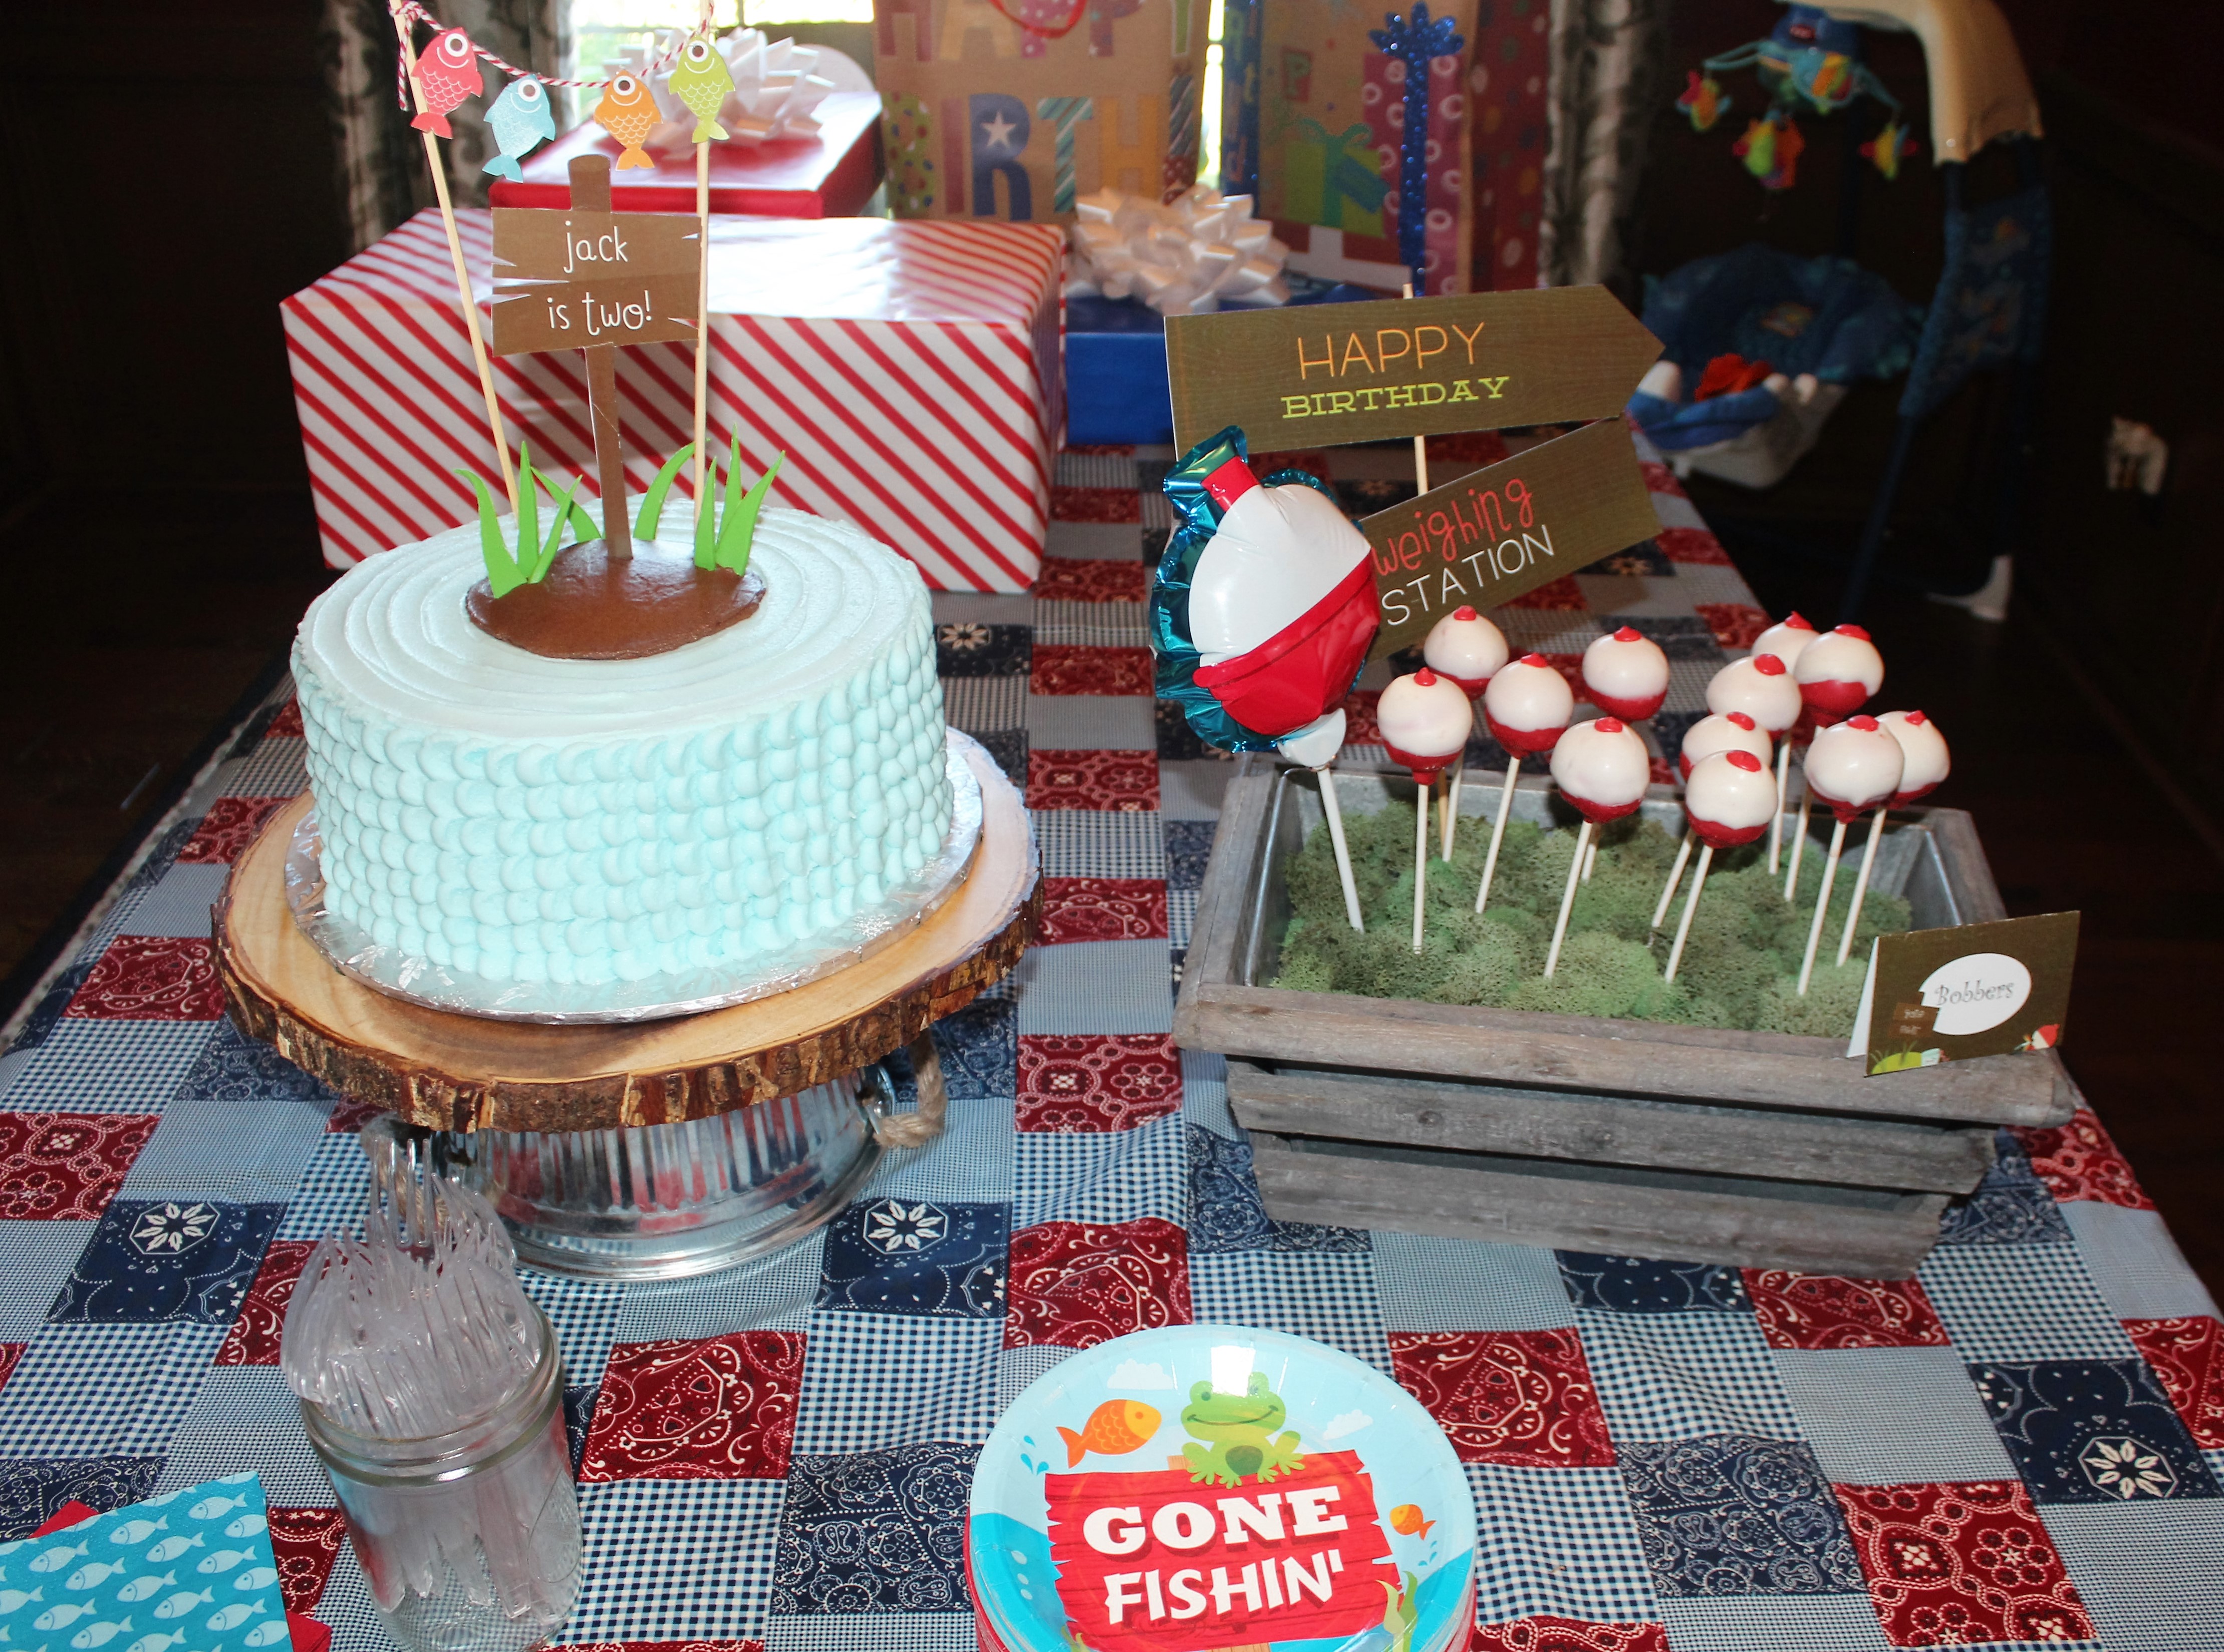 Jack's Fishing Birthday Party - Project Nursery